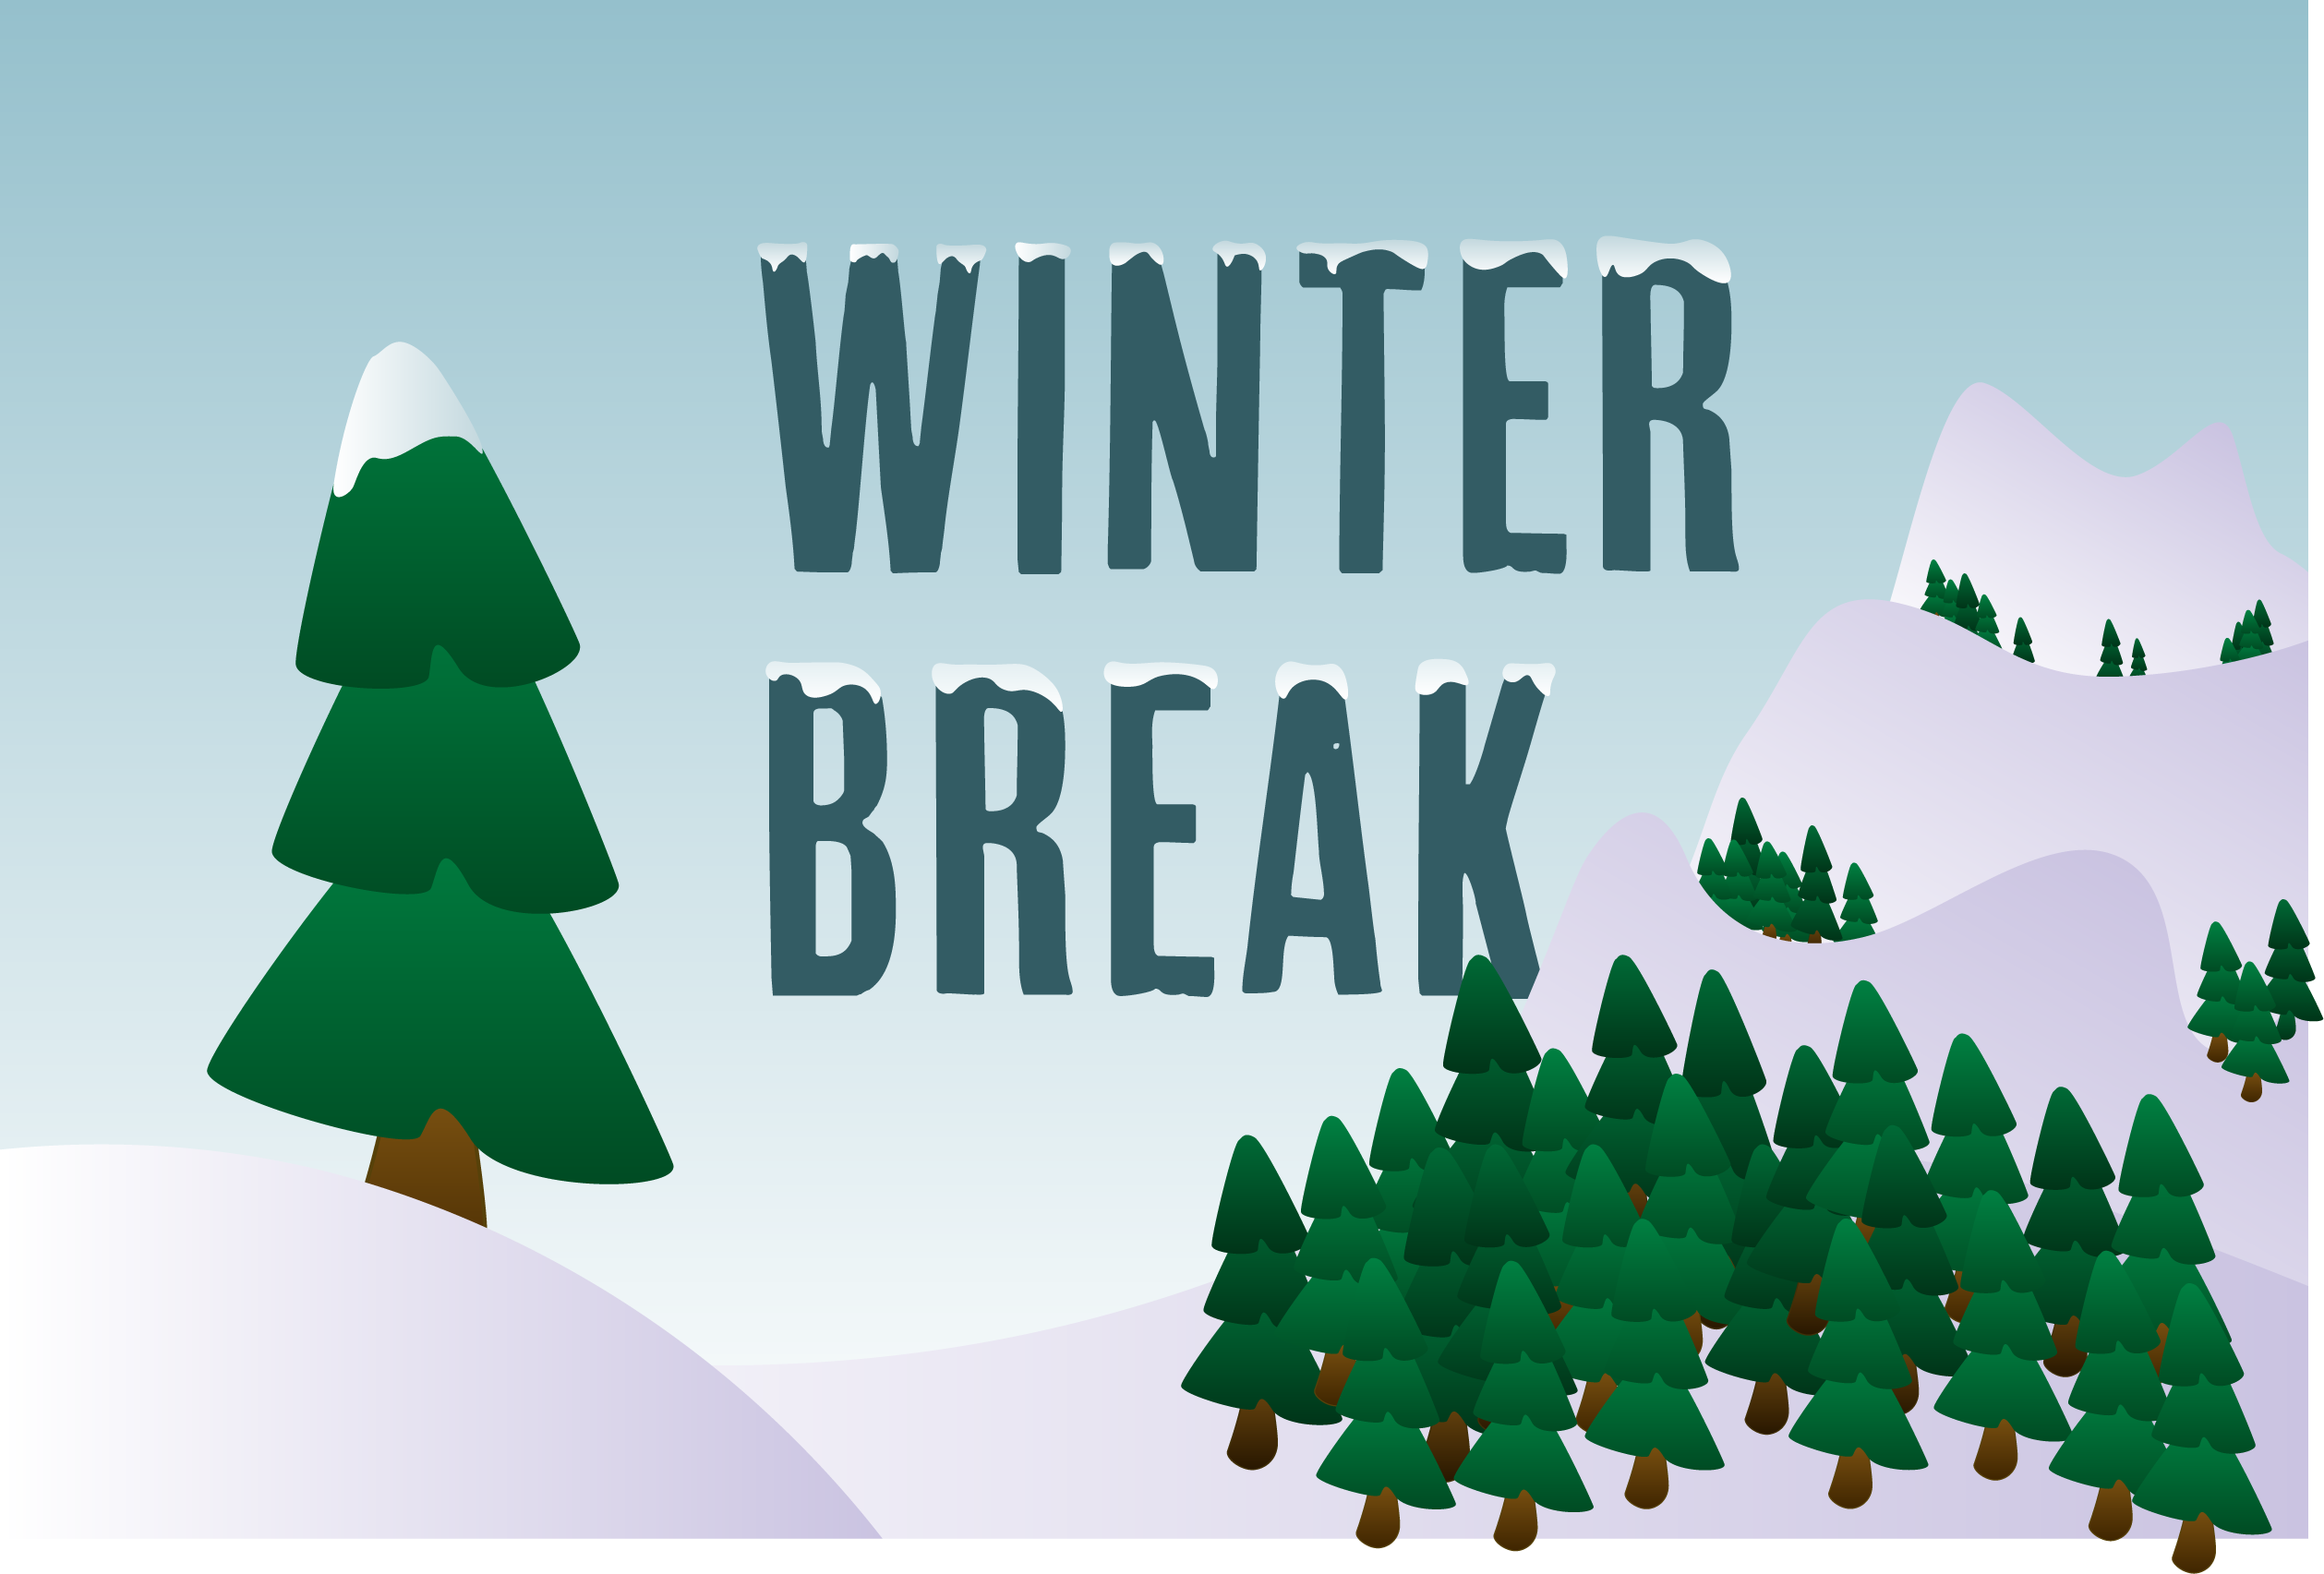 Pub Theology — It’s time for our winter break